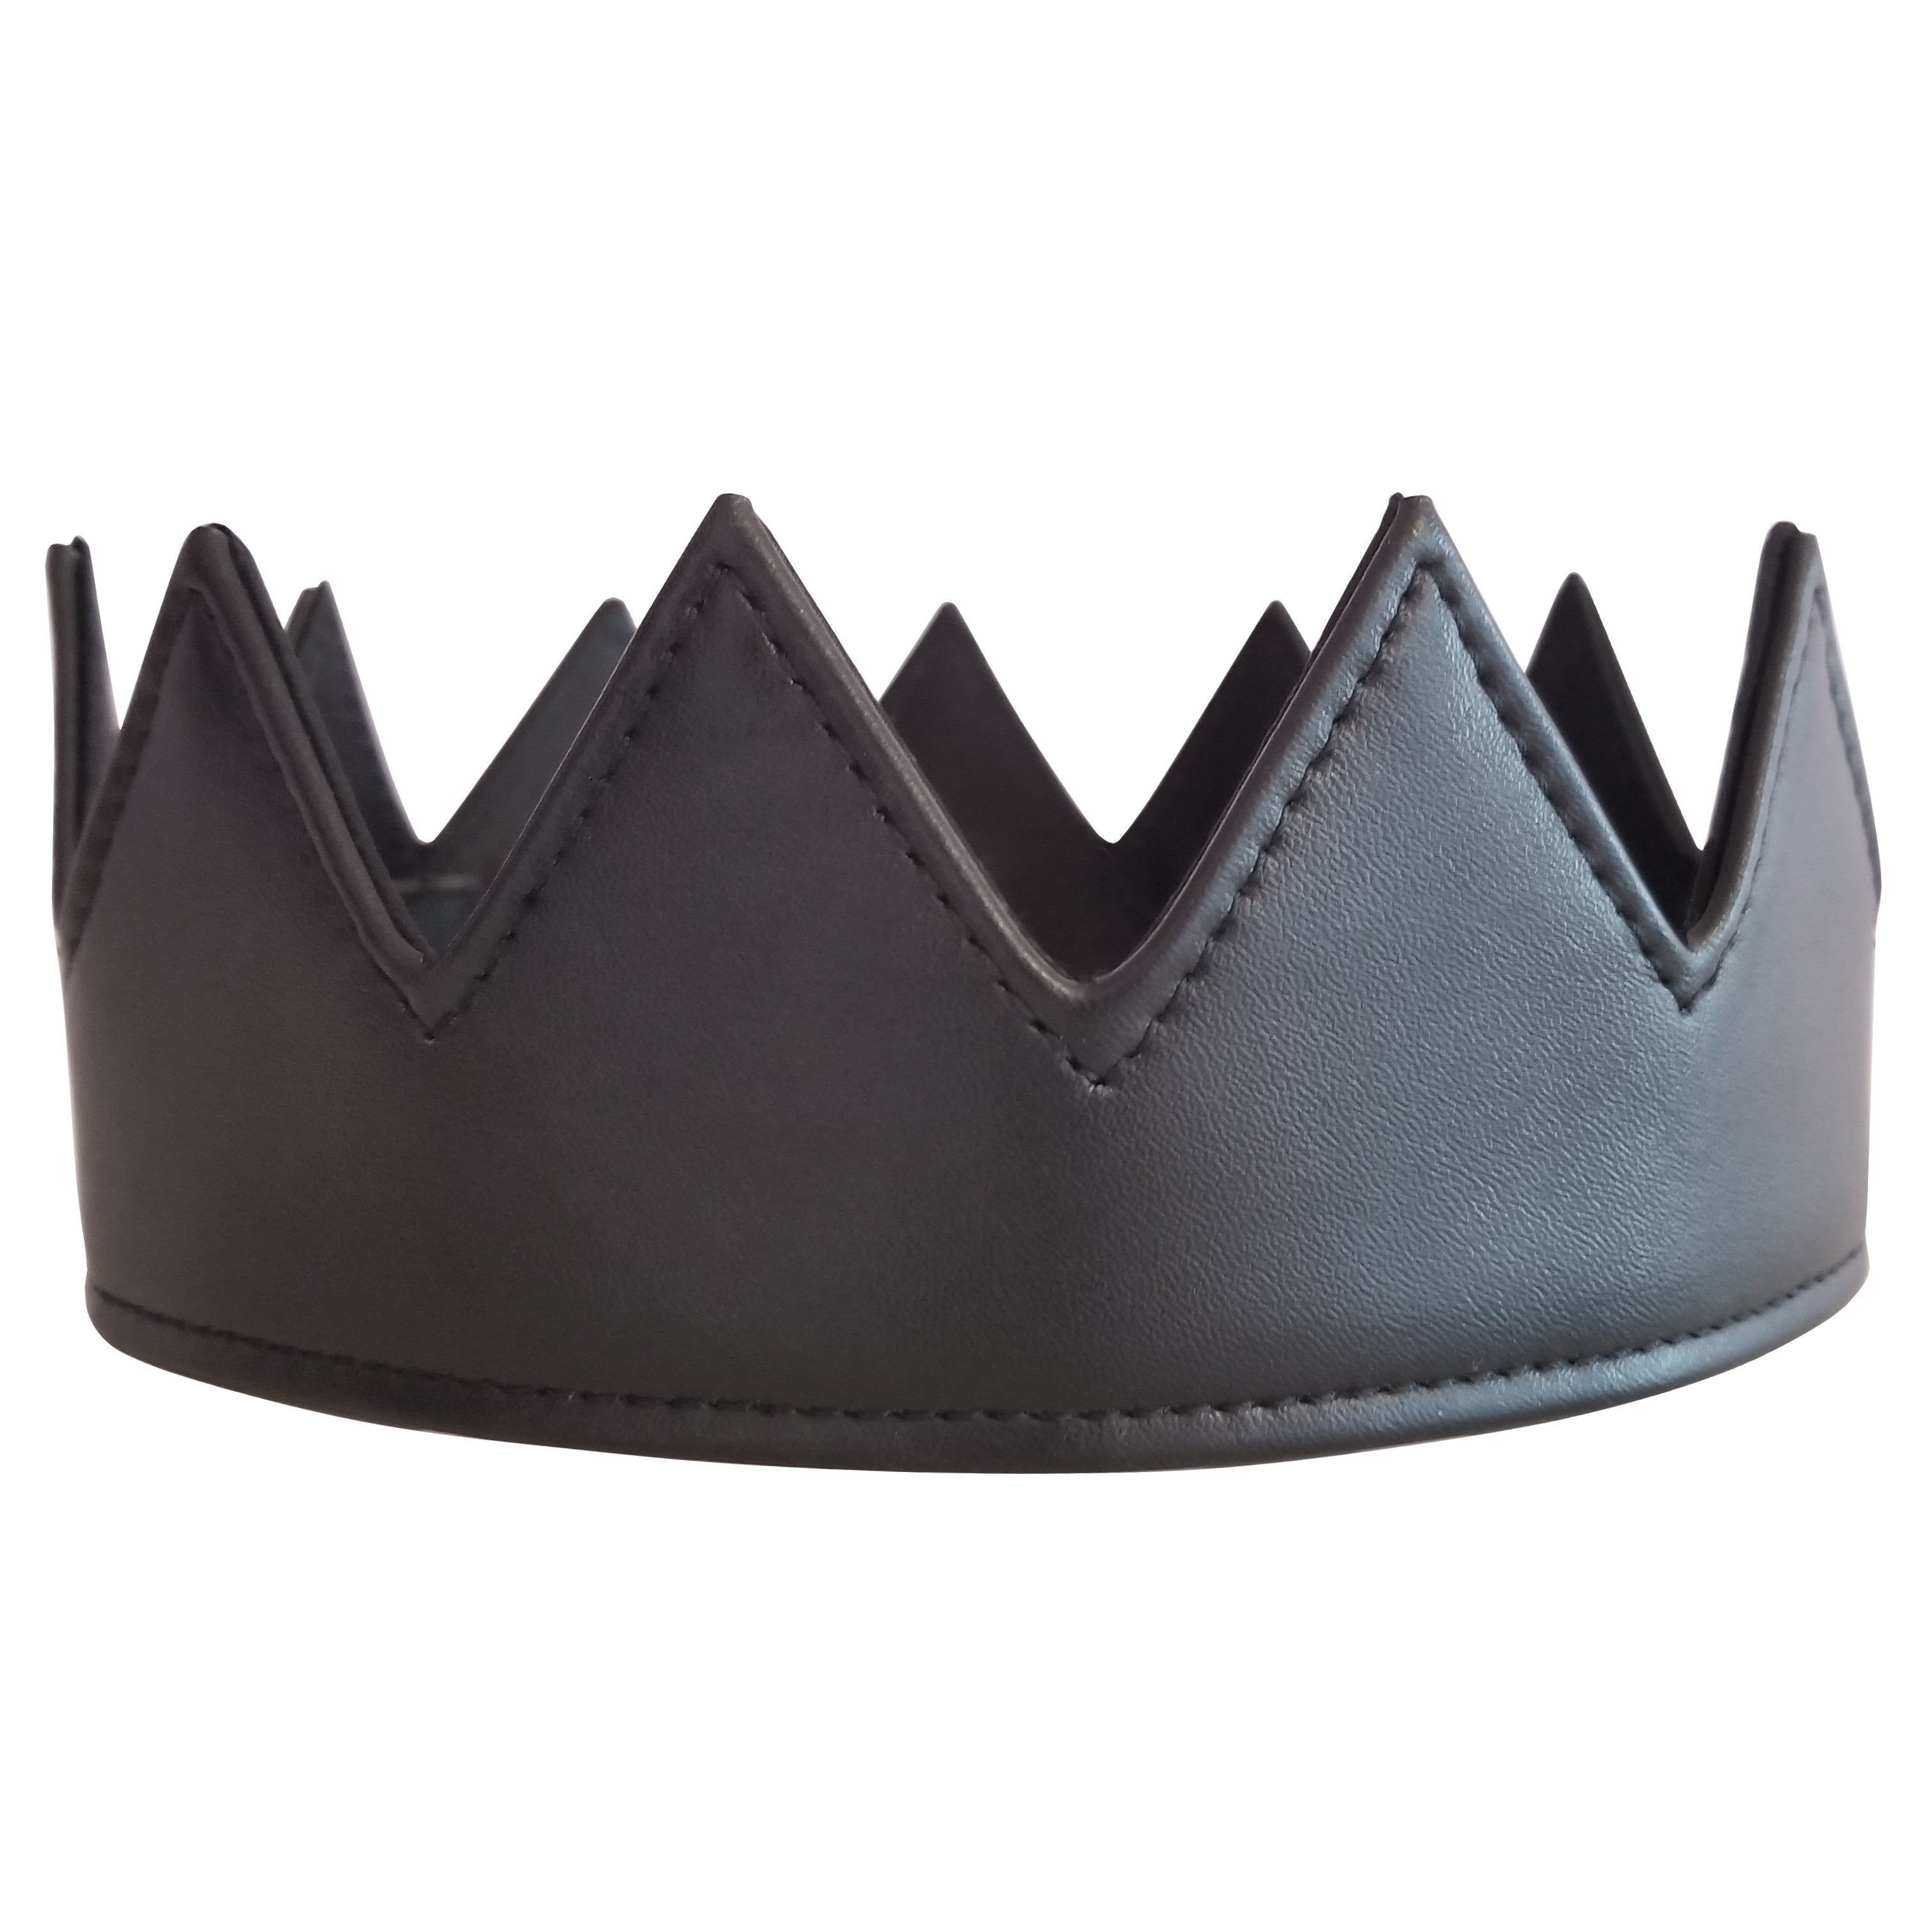 leather crown 2019